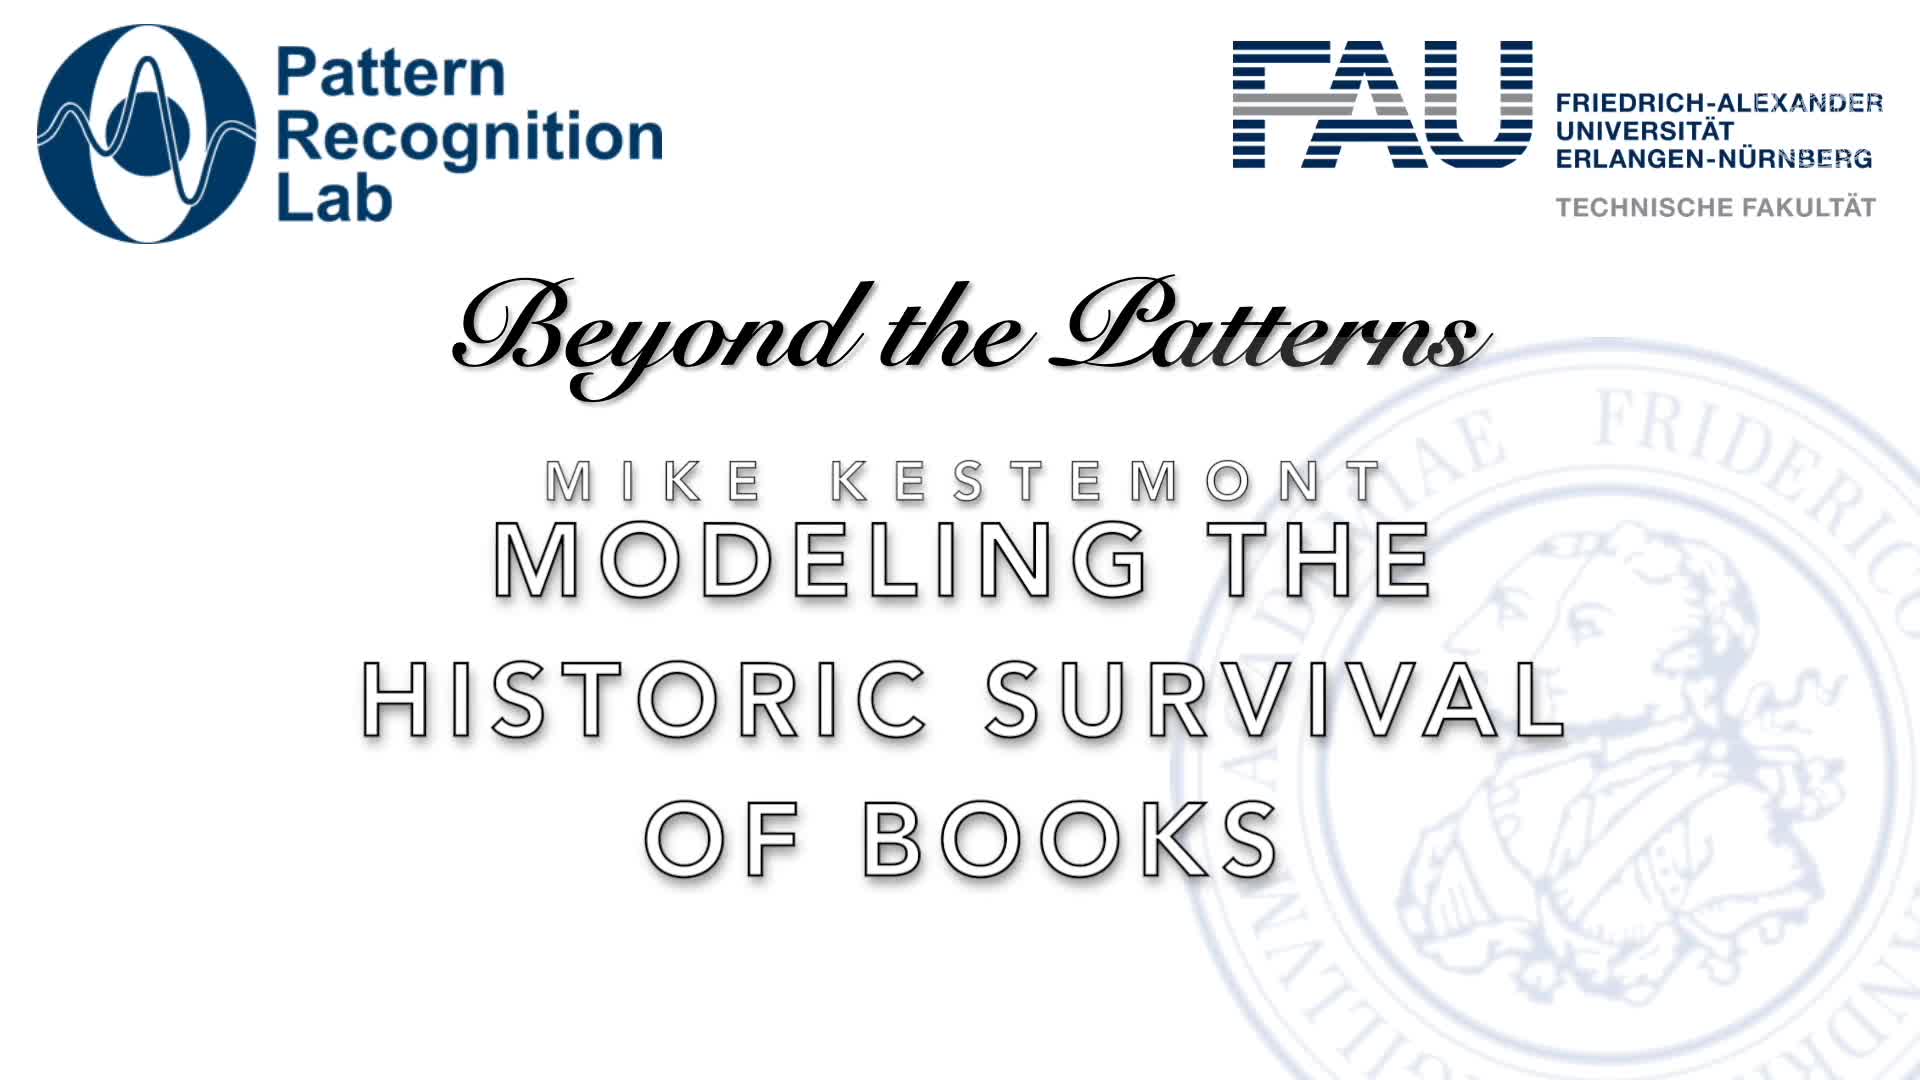 Beyond the Patterns - Dr. Mike Kestemont - Ecology and Cultural Heritage: Modelling the Historic Survival of Books and Authors with Unseen Species Models preview image